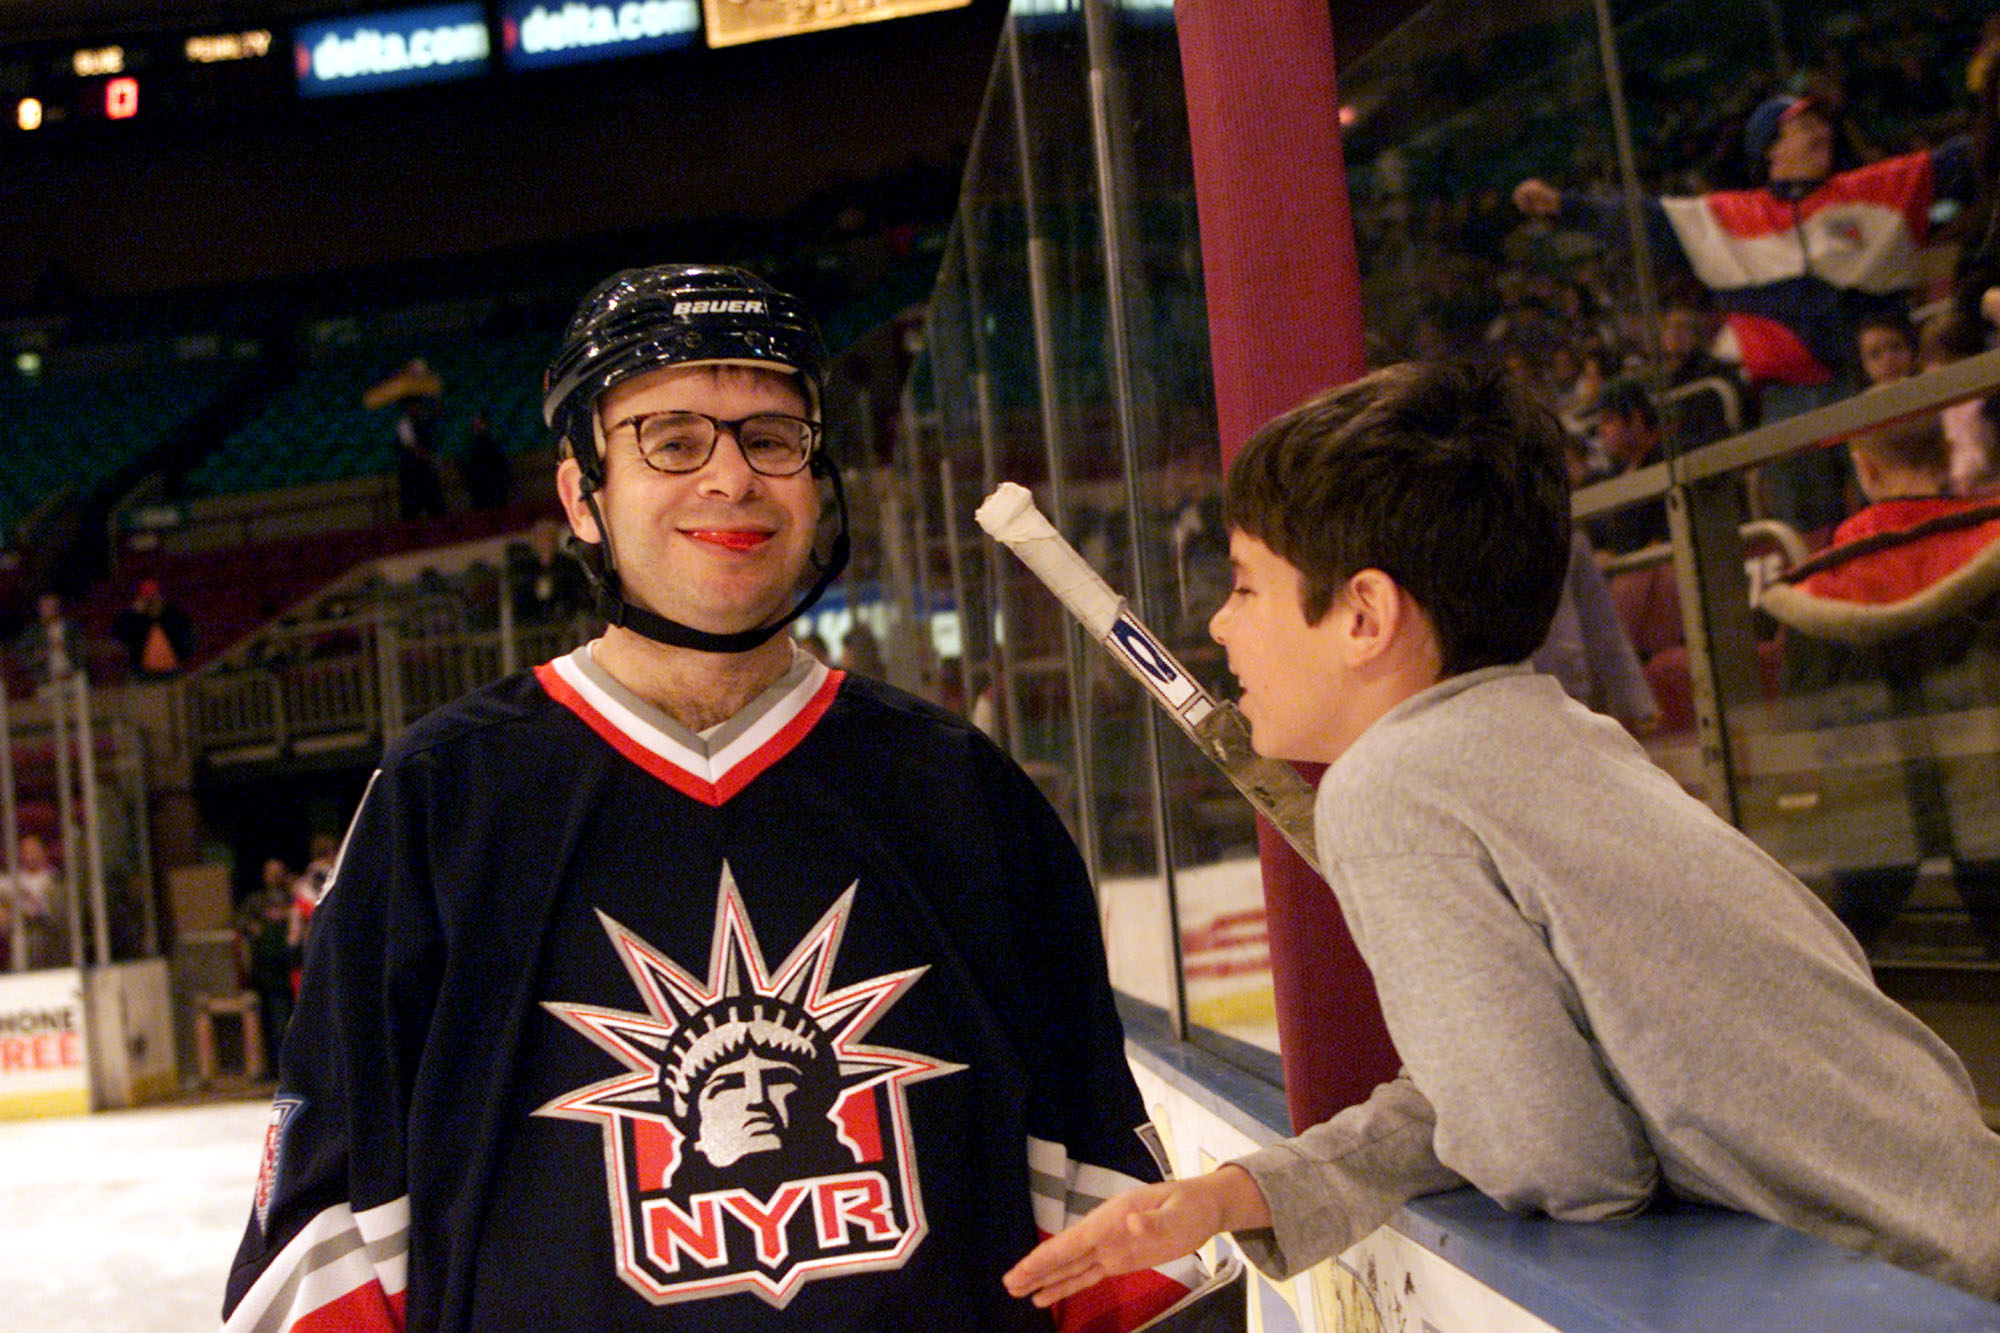 Rick Moranis and Mitchell Moranis at the Superskate 2001 charity hockey event on January 7, 2001 in New York City. | Source: Getty Images